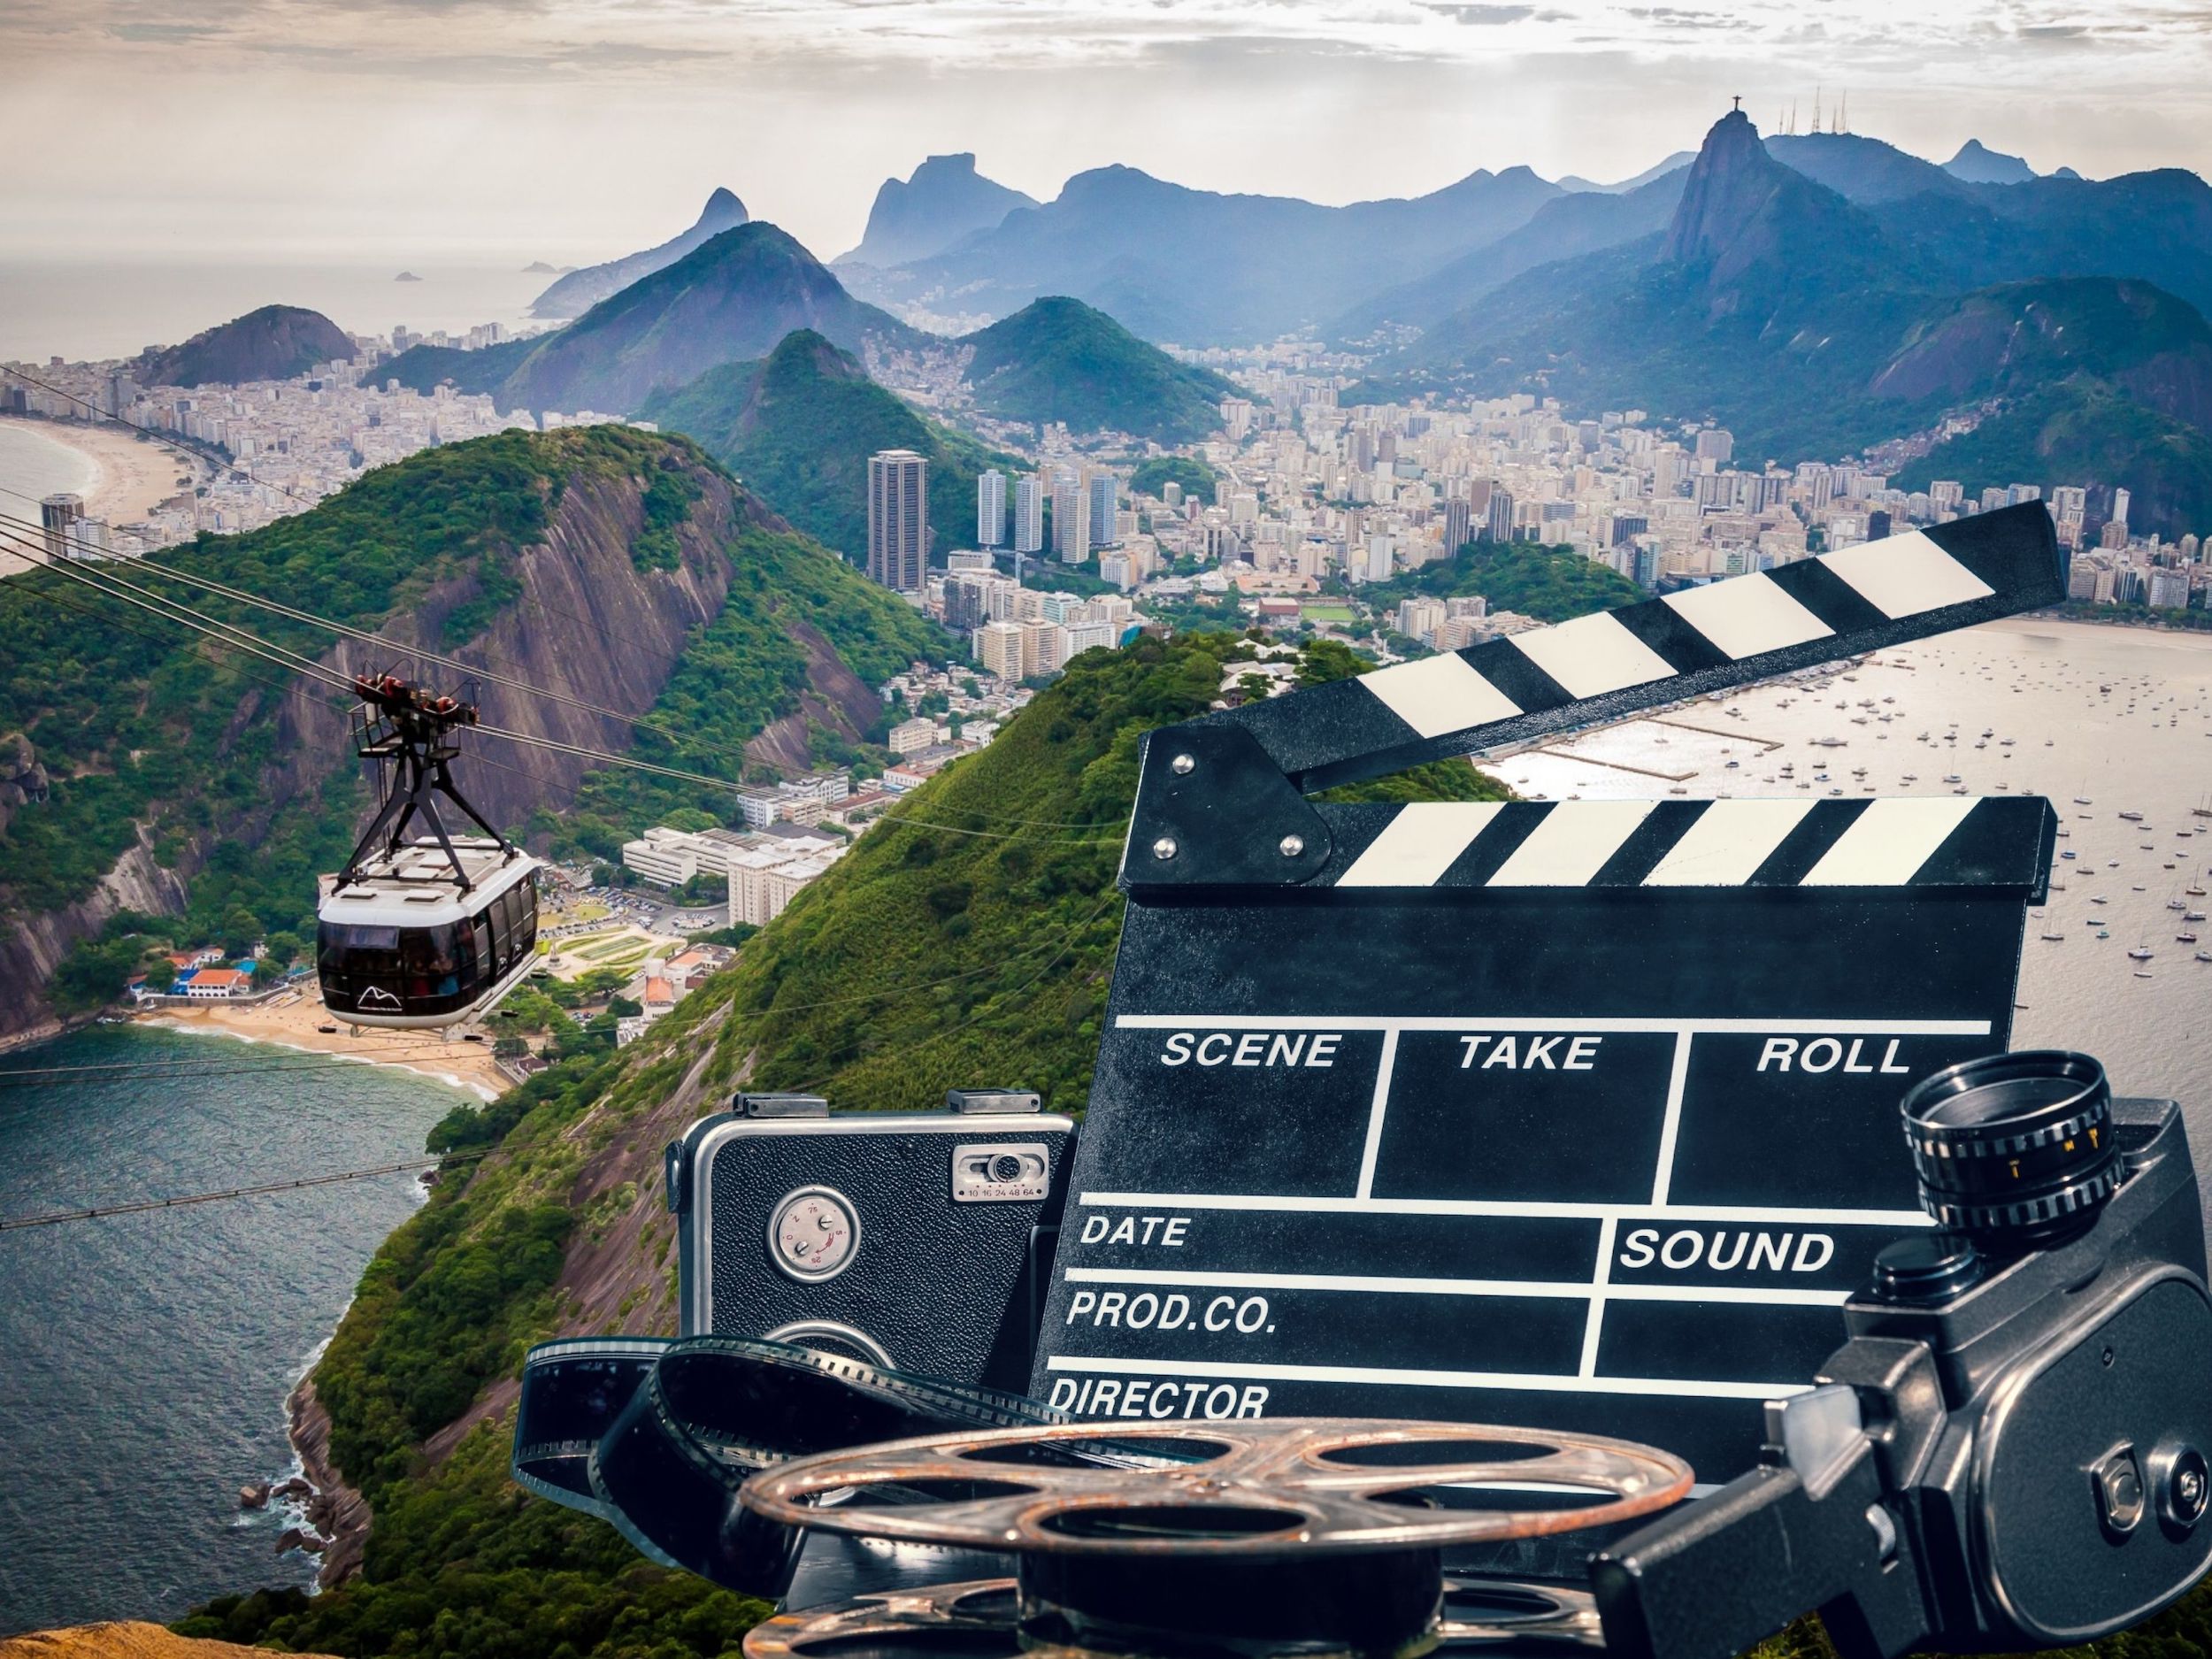 13 Extraordinary Movies Set In South America That Will Inspire You To Visit!